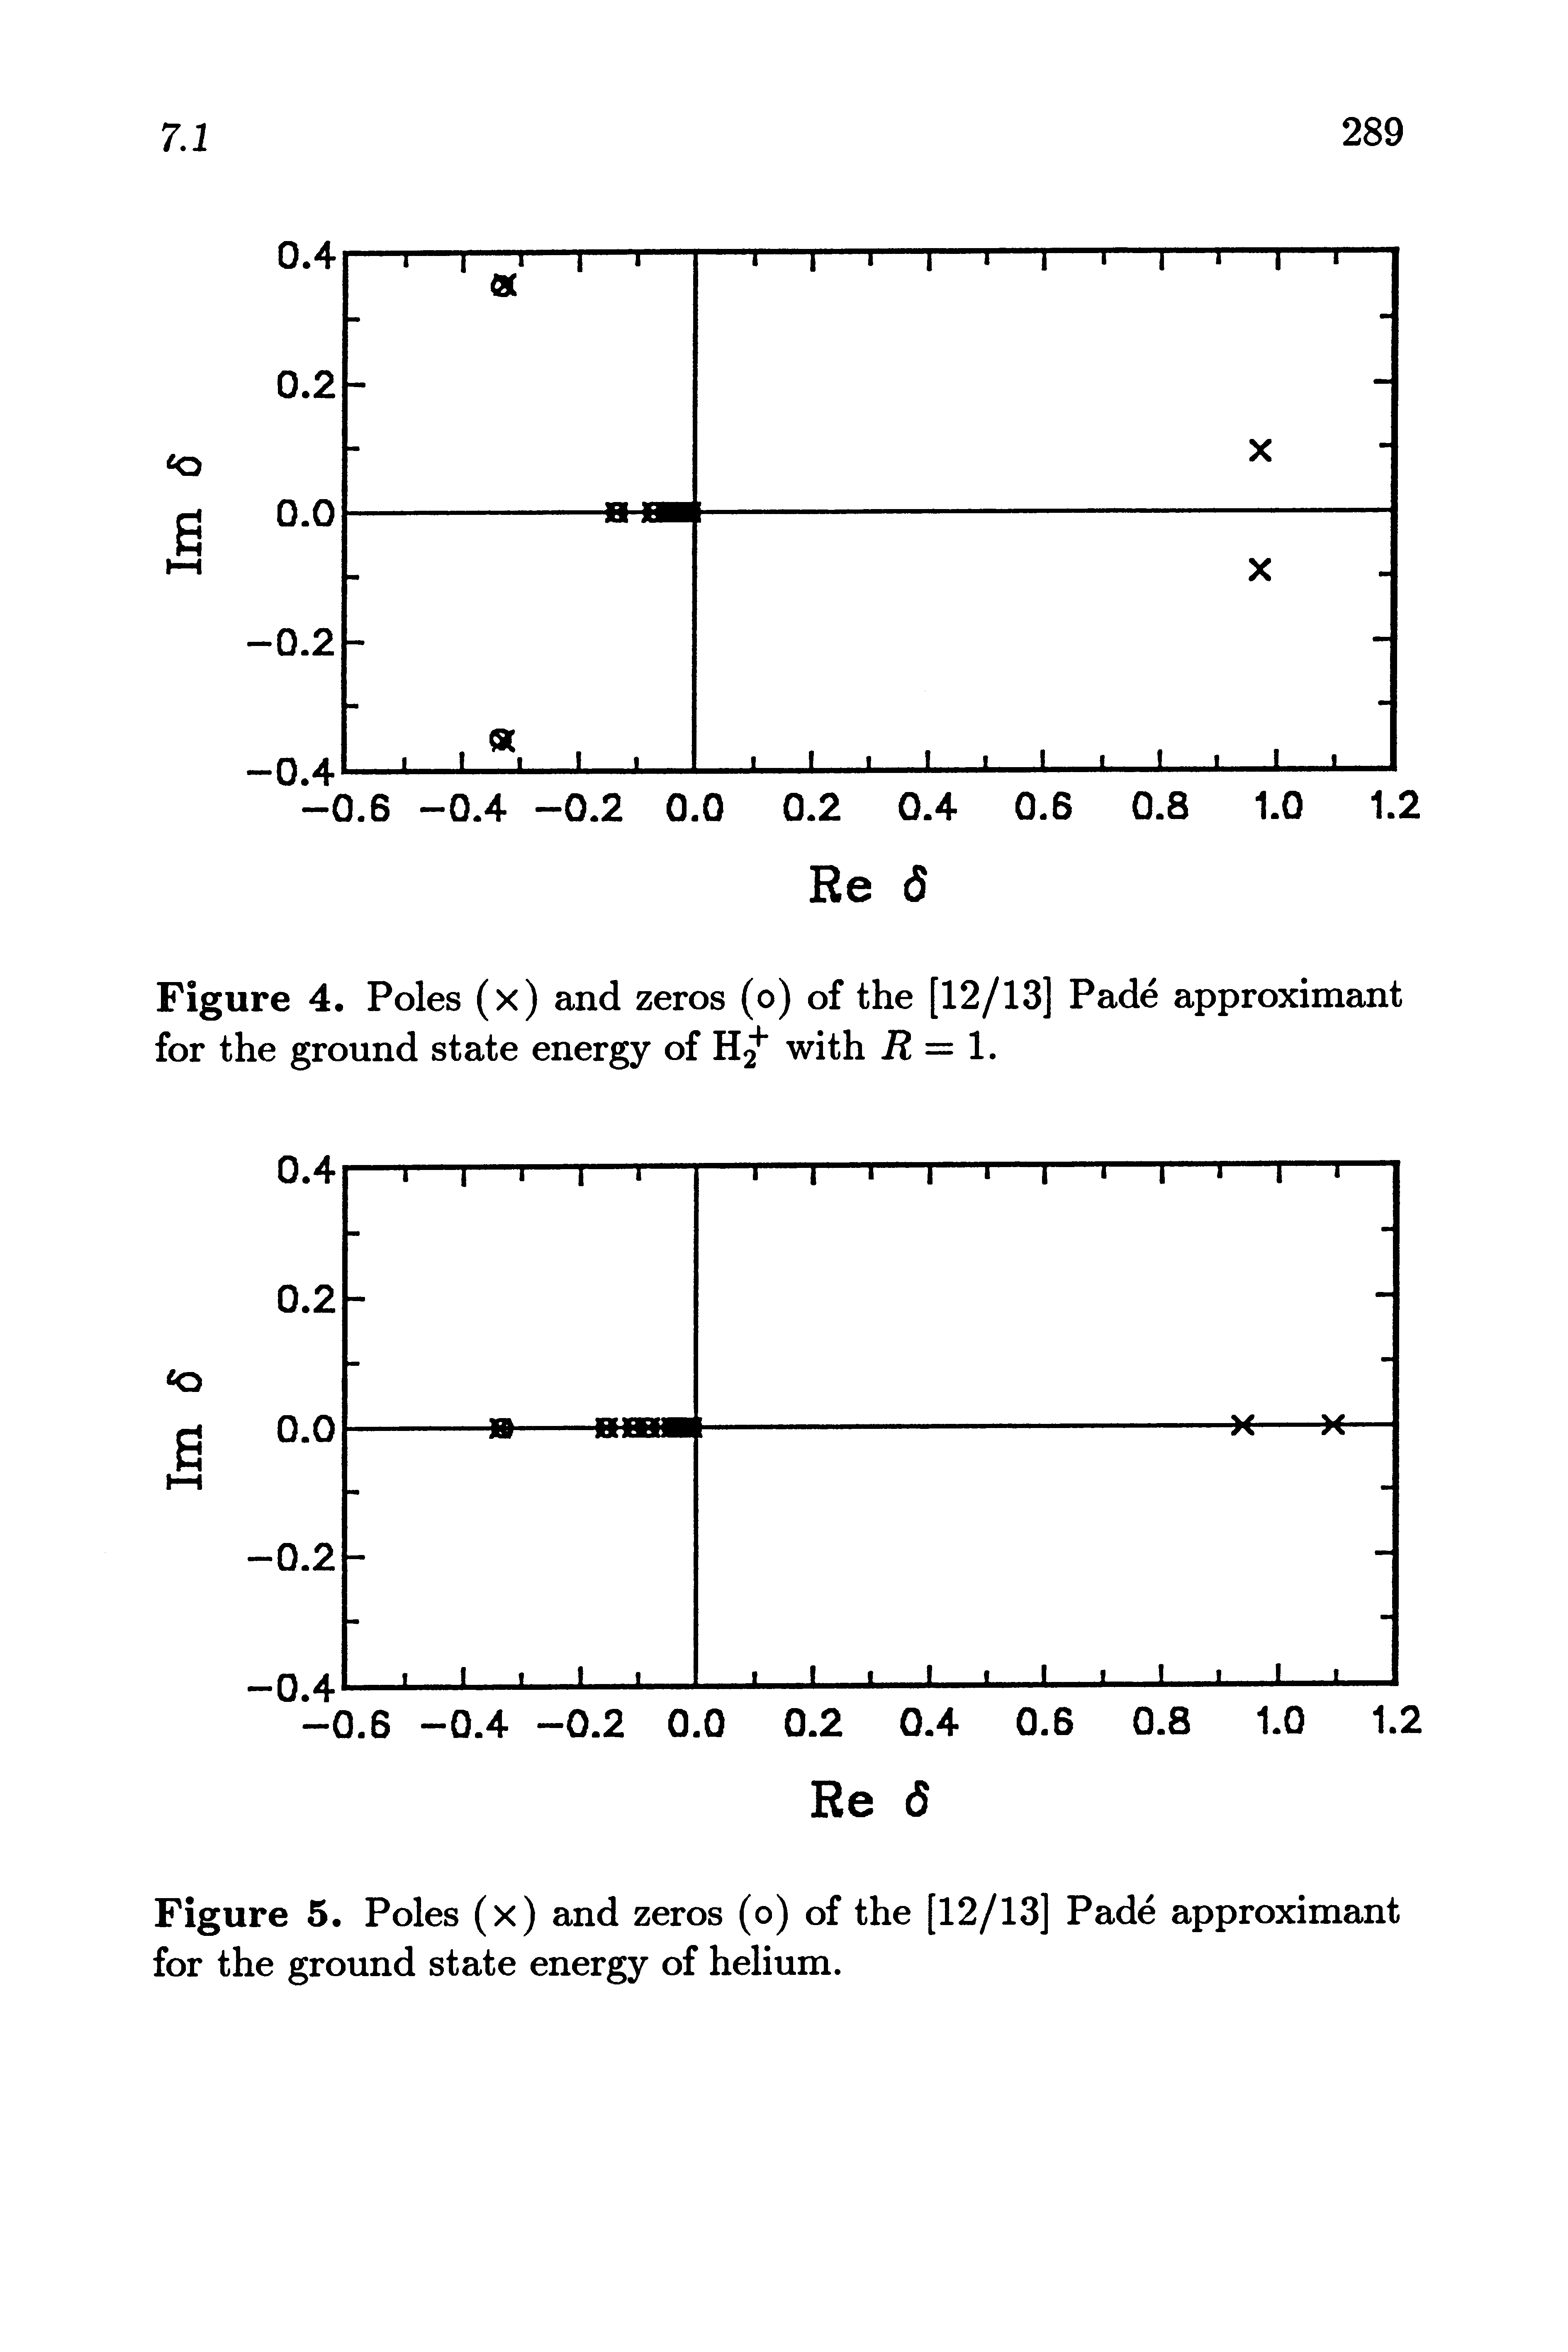 Figure 5. Poles (x) and zeros (o) of the [12/13] Fade approximant for the ground state energy of helium.